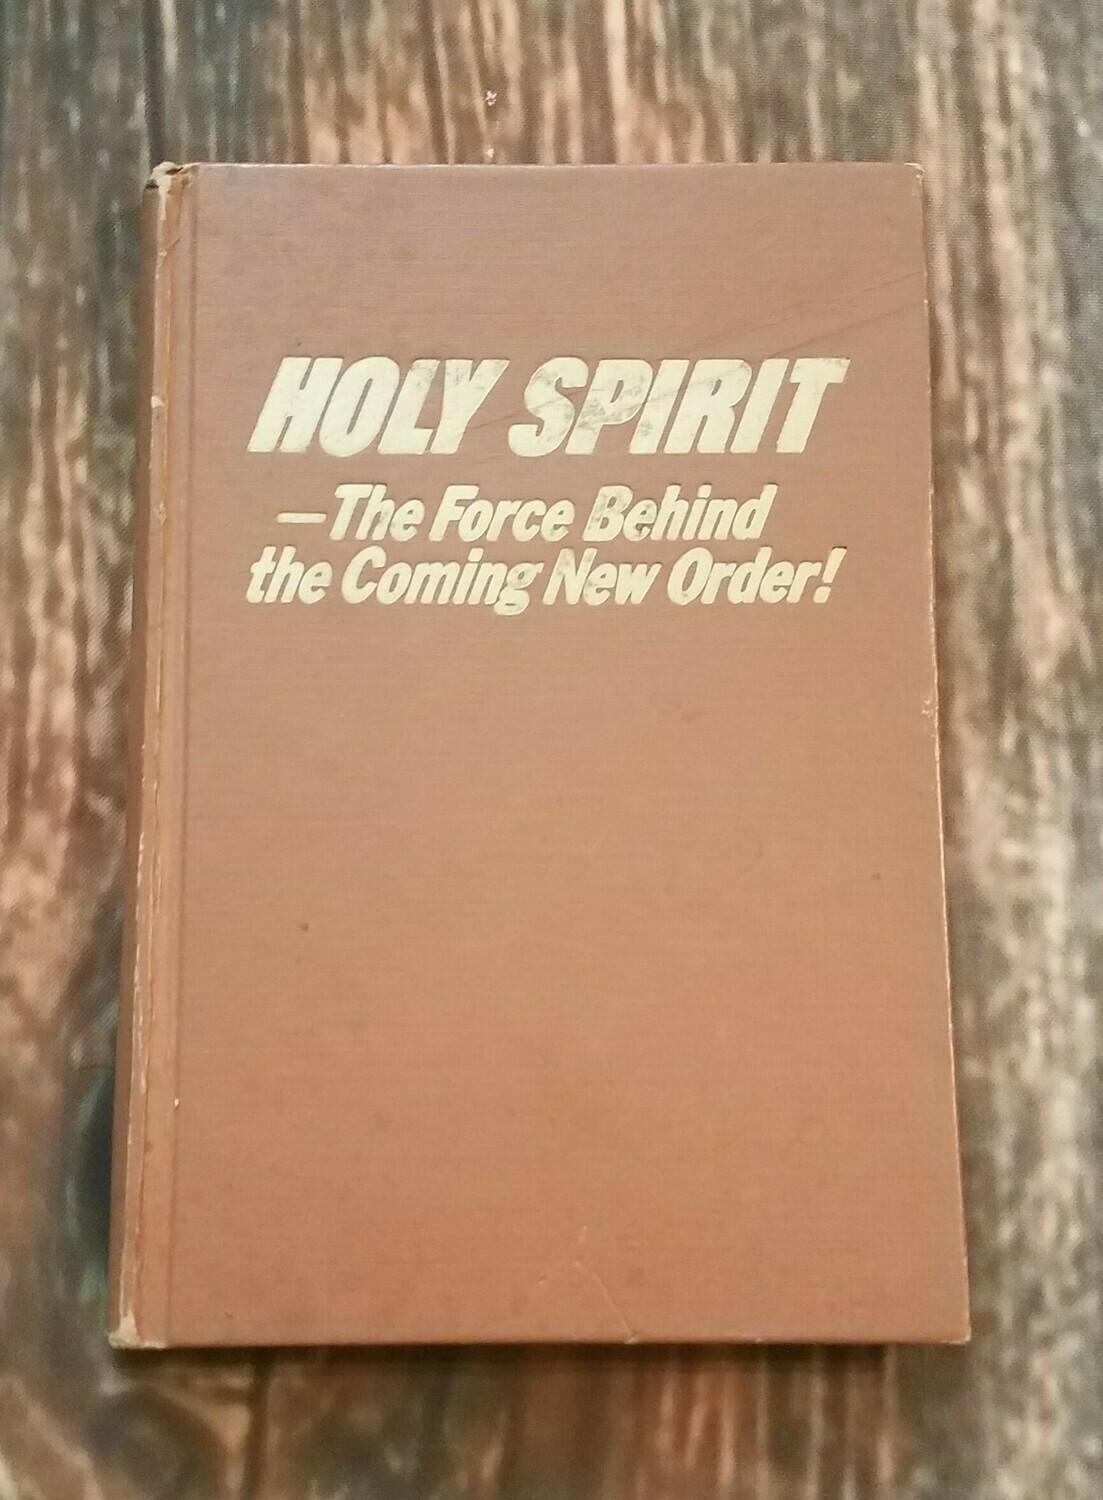 Holy Spirit: The Force Behind the Coming New Order! by Watch Tower Bible and Tract Society of Pennsylvania